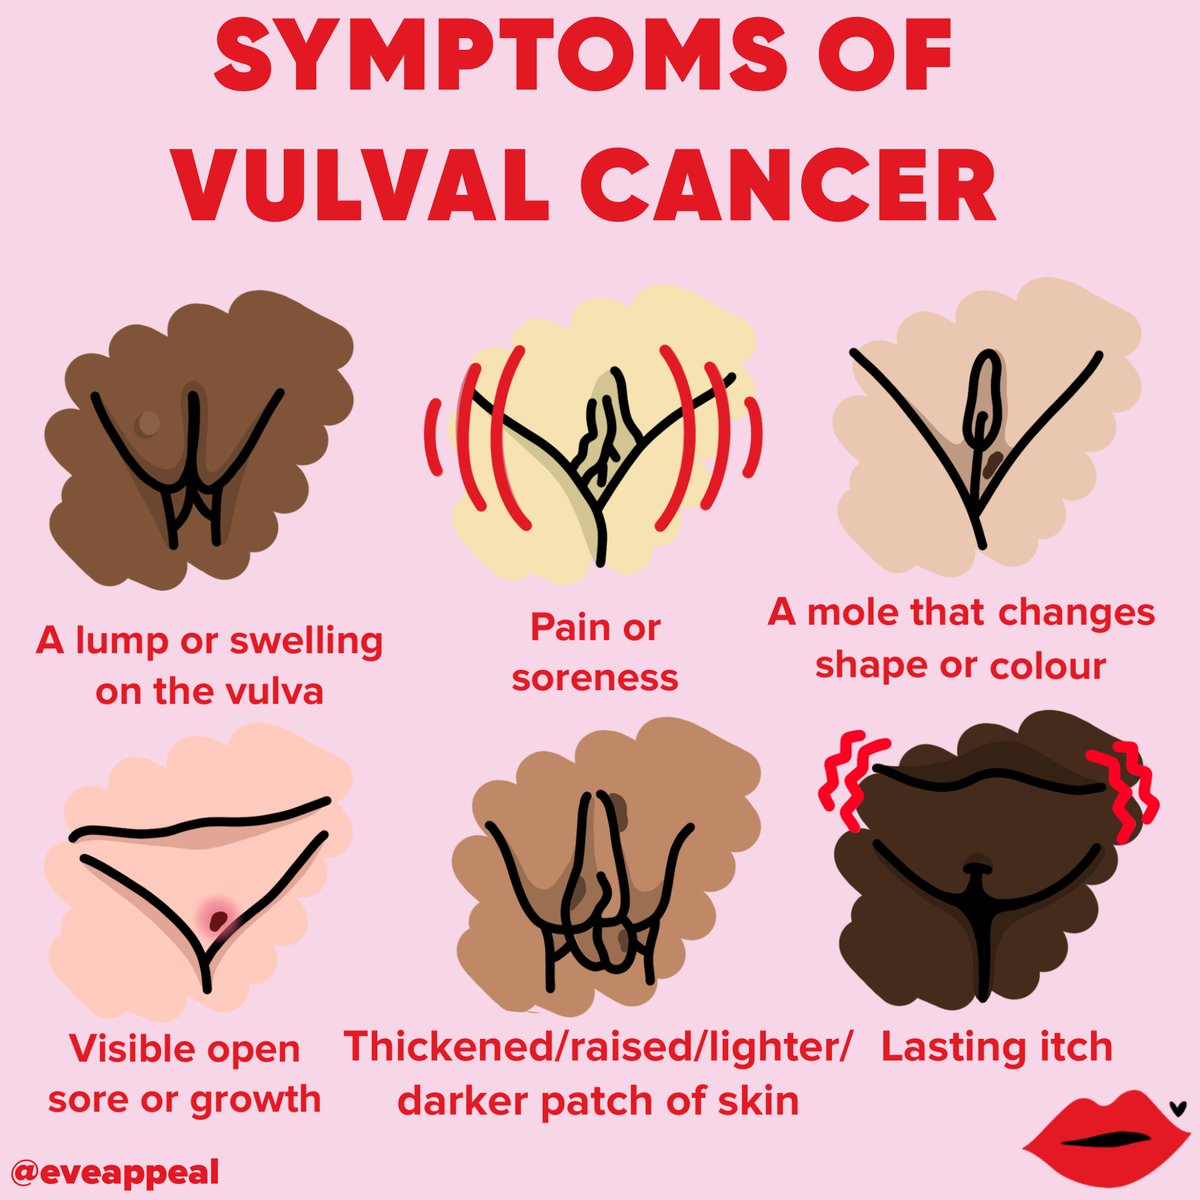 Another key group of symptoms to look out for is changes to the vulva. Vulval cancer affects around 1,400 women and people with vulvas a year in the UK. A thread🧵